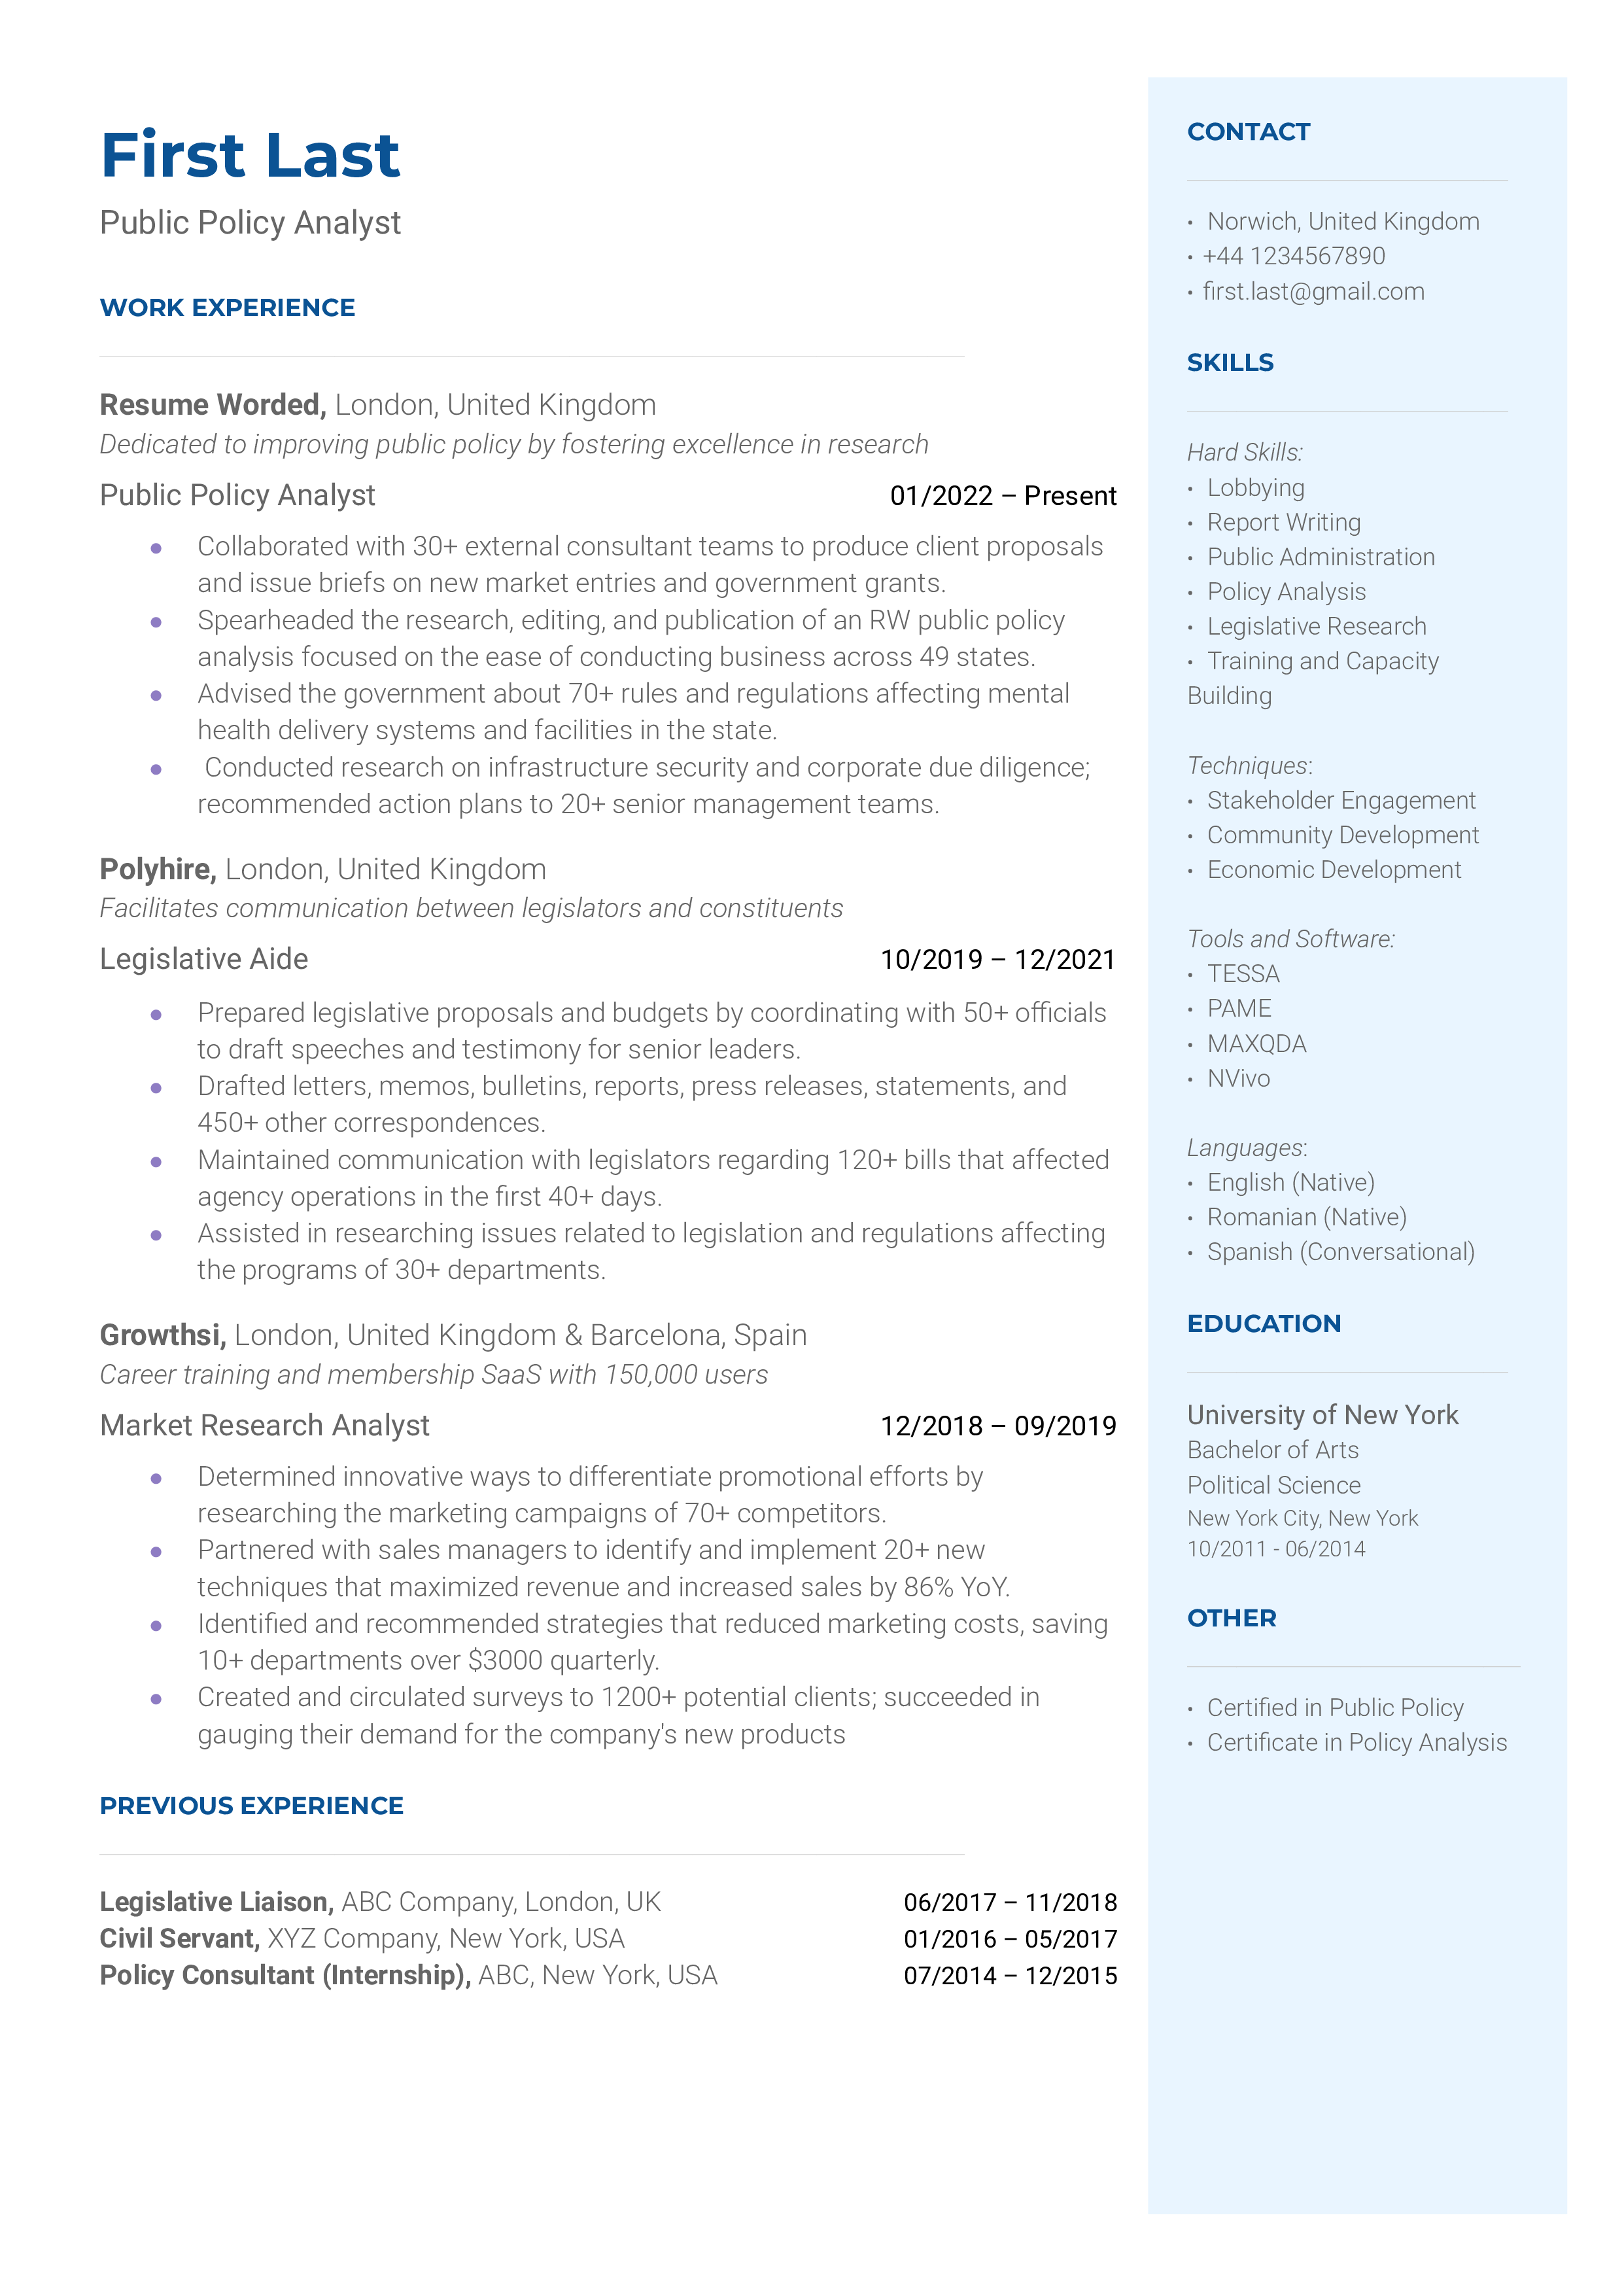 Public Policy Analyst Resume Sample